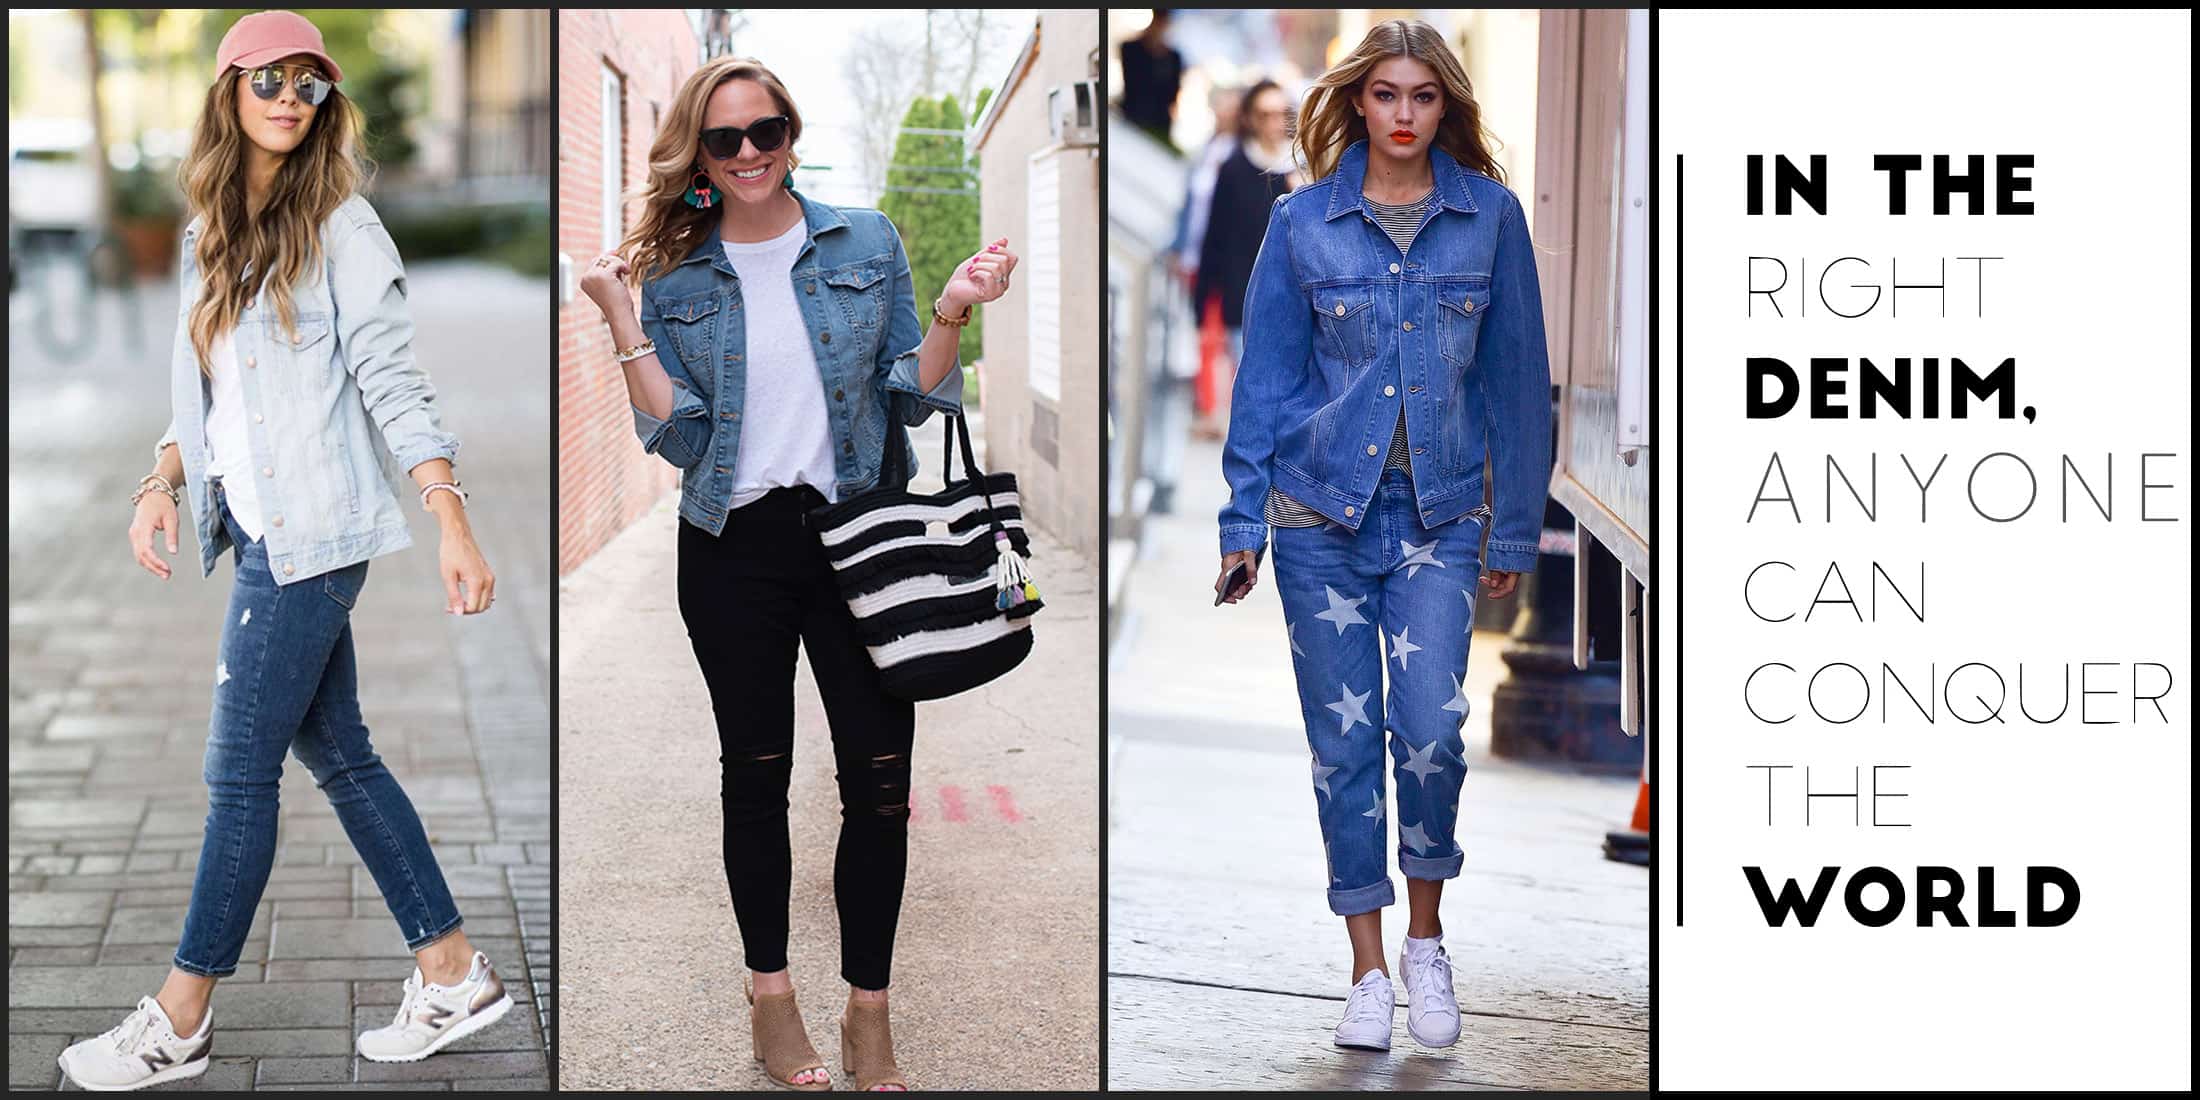 What kind of pants pair with a denim jacket? - Quora